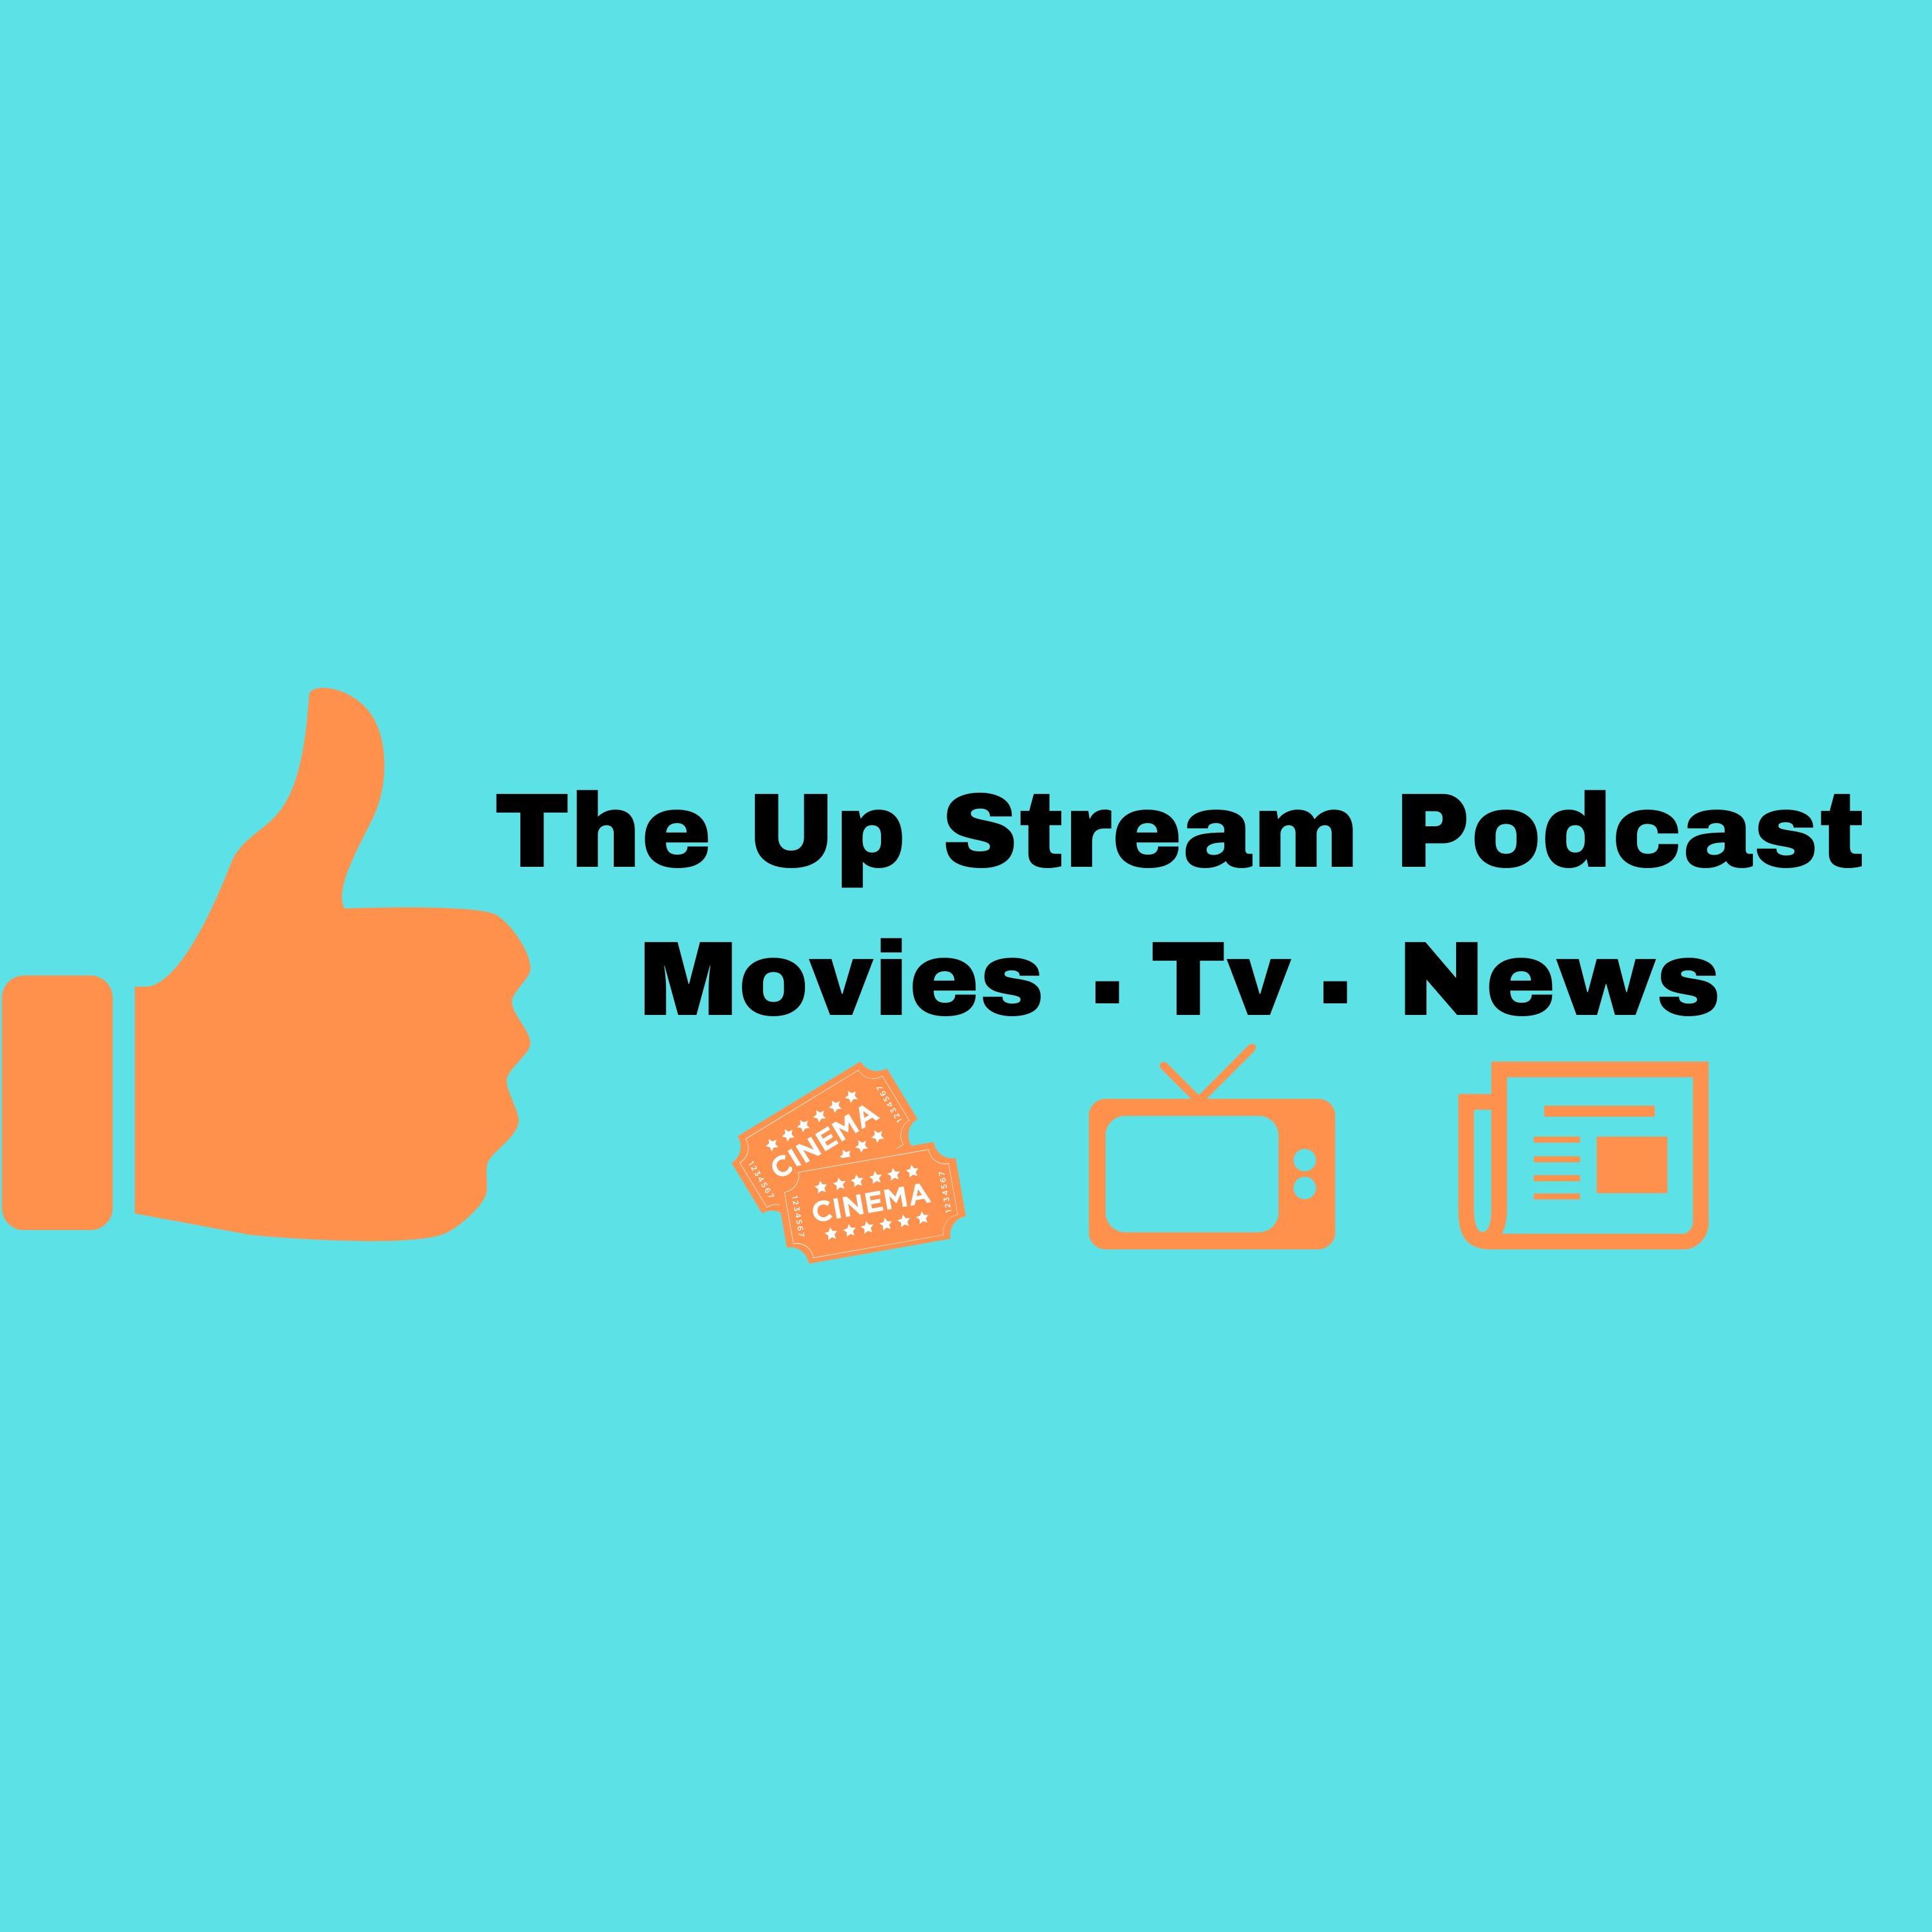 The Up Stream Podcast